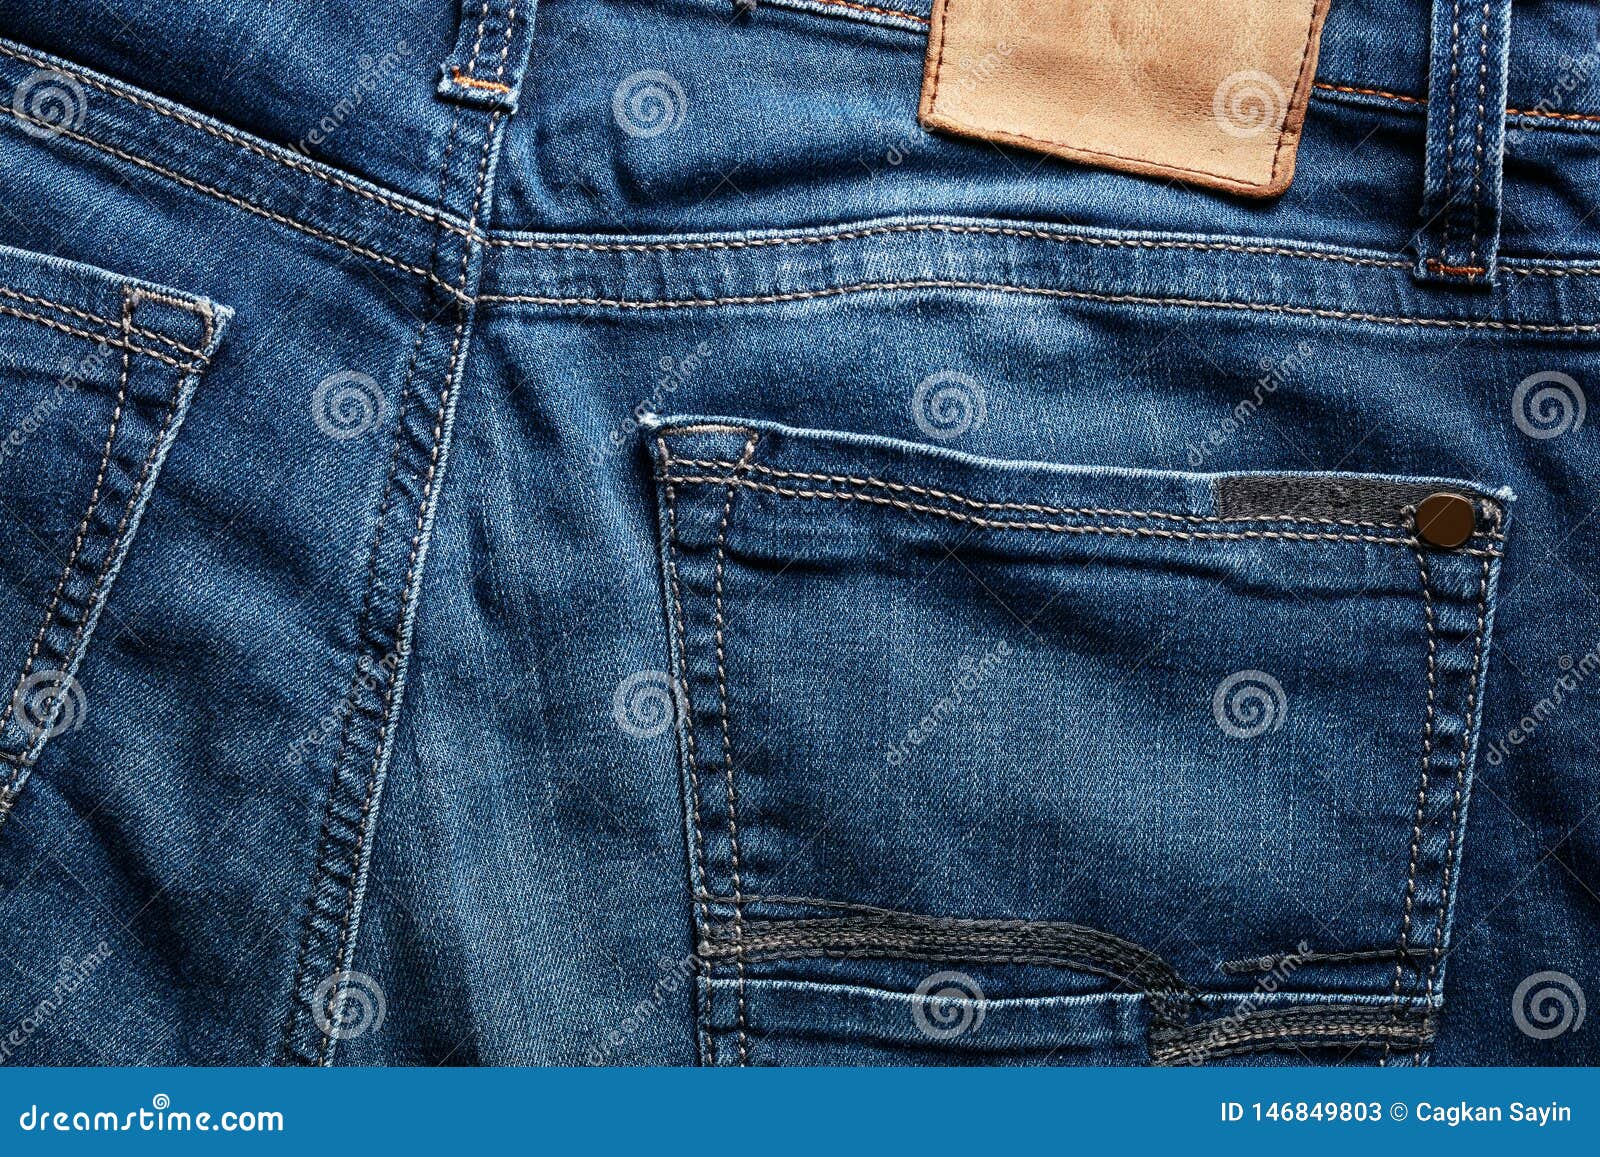 Back of an Indigo Color Blue Jean and Its Pocket Stock Image - Image of ...